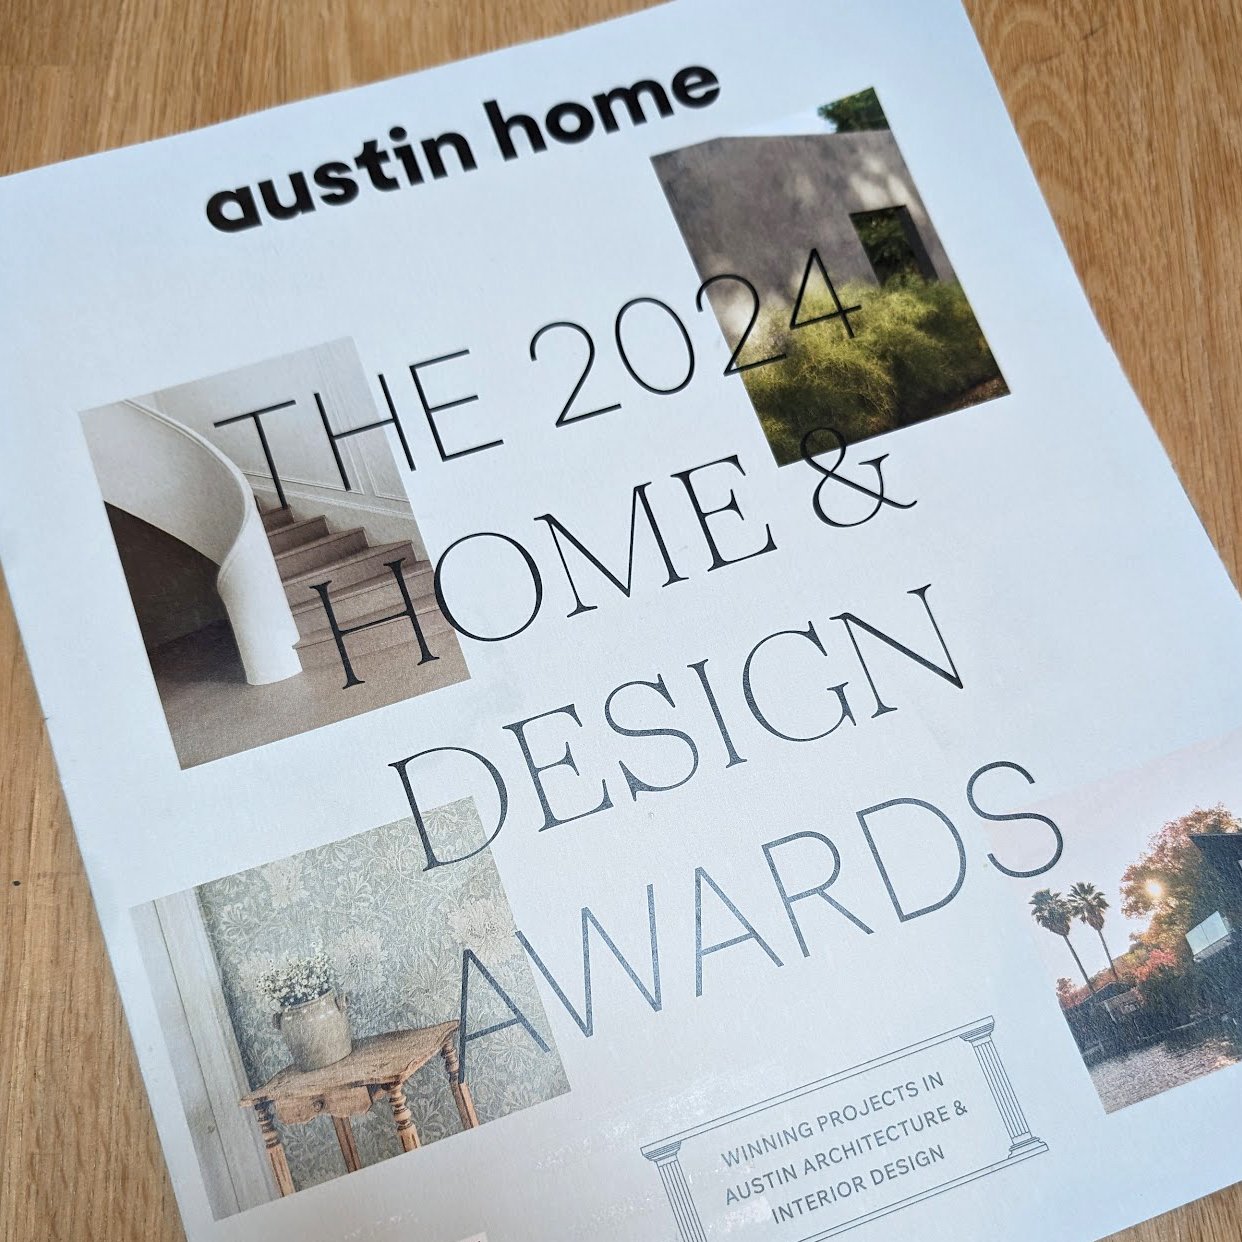 We are thrilled to announce that we have been awarded the General Excellence in Architecture Award at the 2024 @austin_home Home &amp; Design Awards. 

This is our second time to receive this top honor, which acknowledges outstanding overall achievem